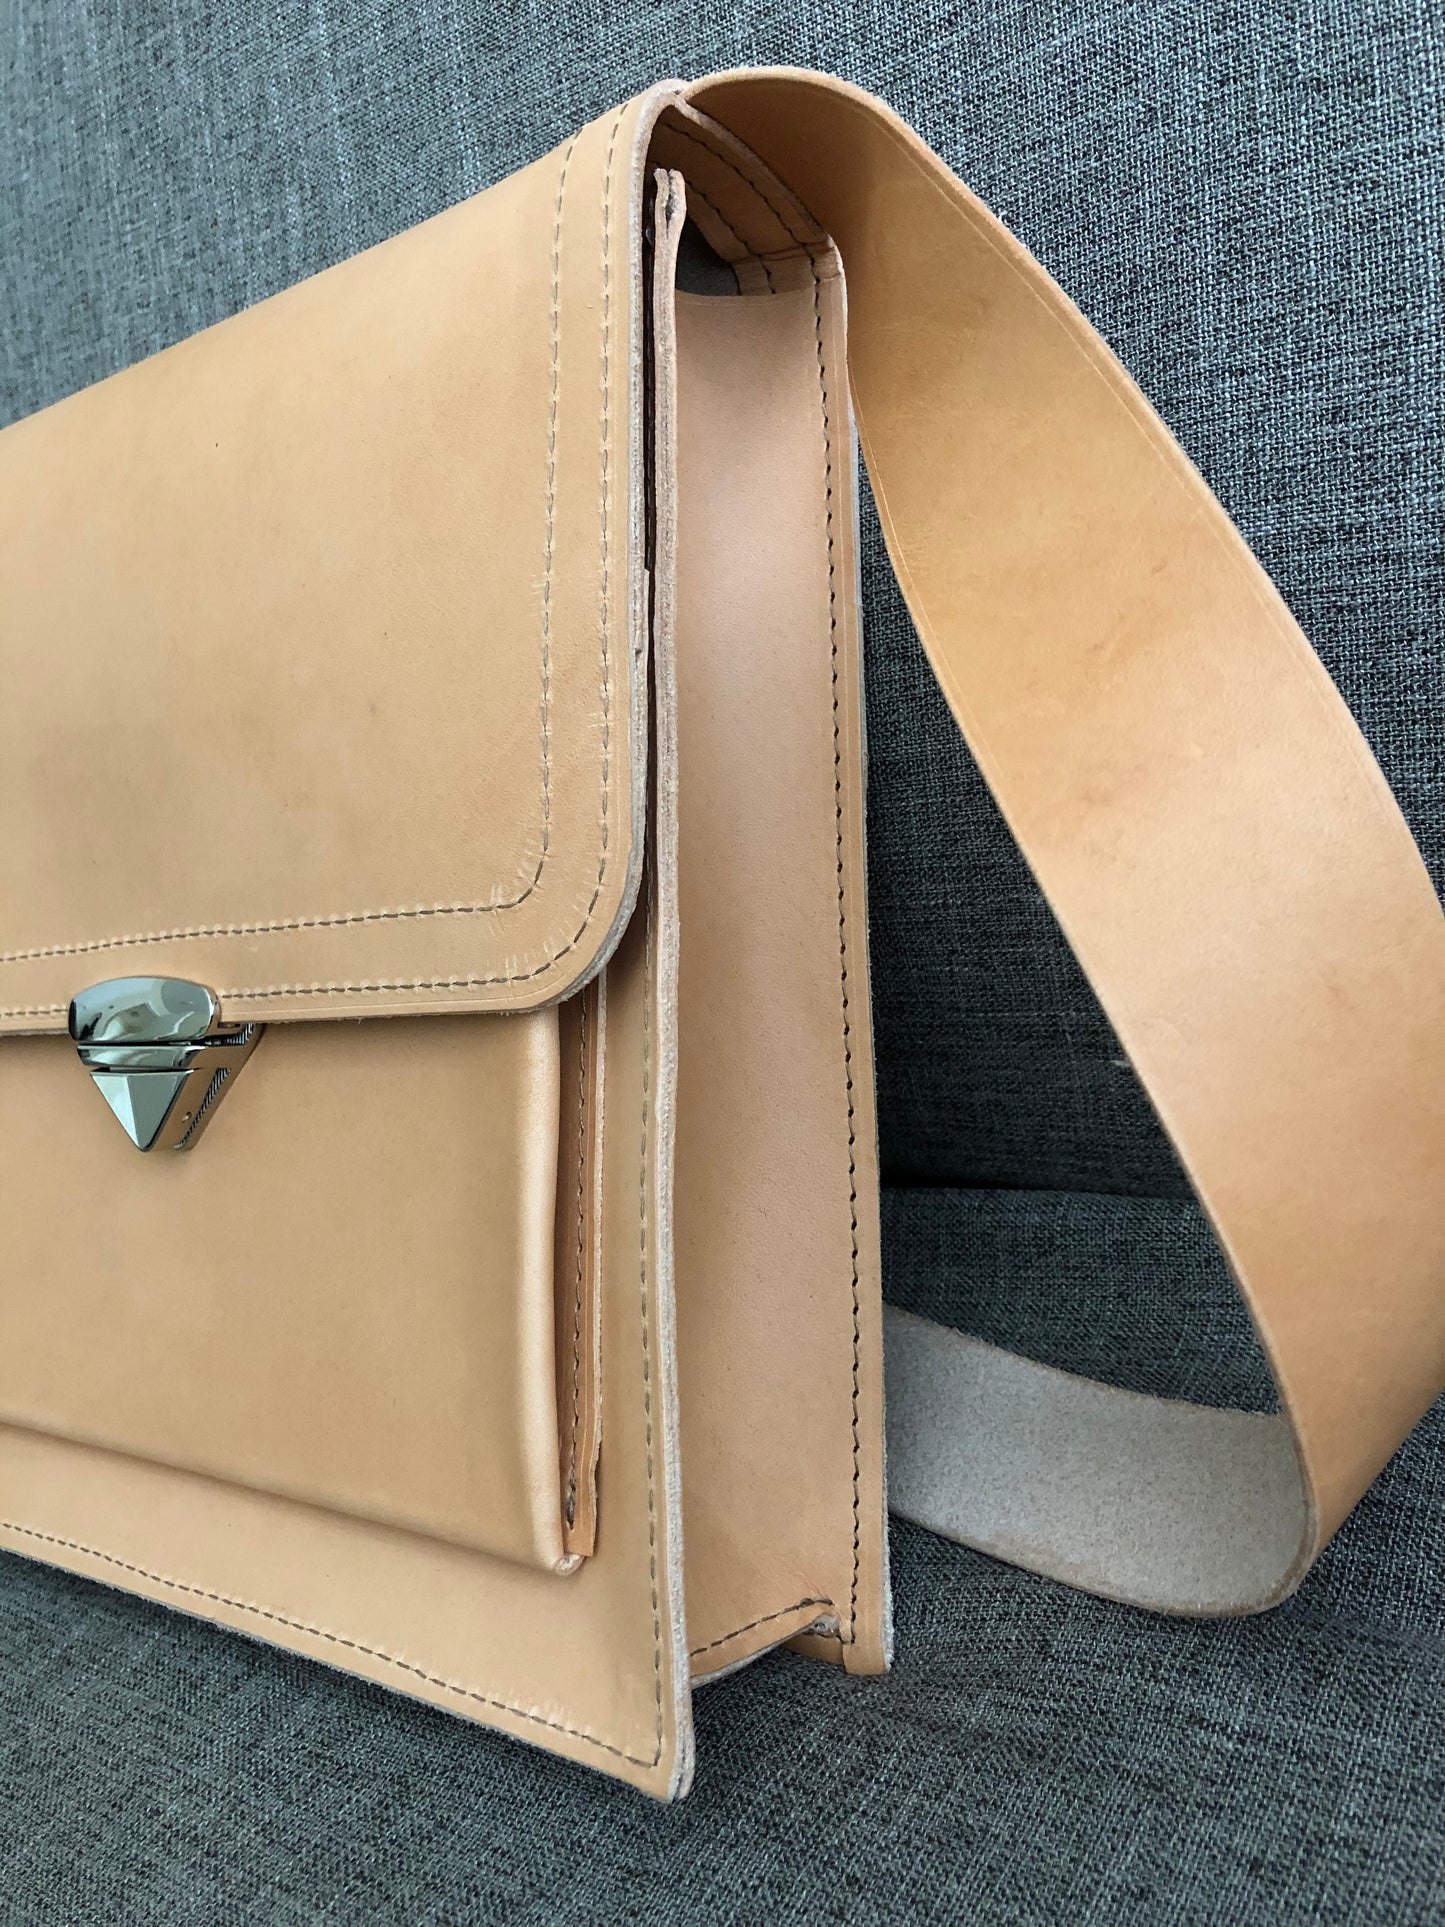 Nude Leather Crossbody | Full Grain Leather Bag | Handcrafted Leather Crossbody Bag